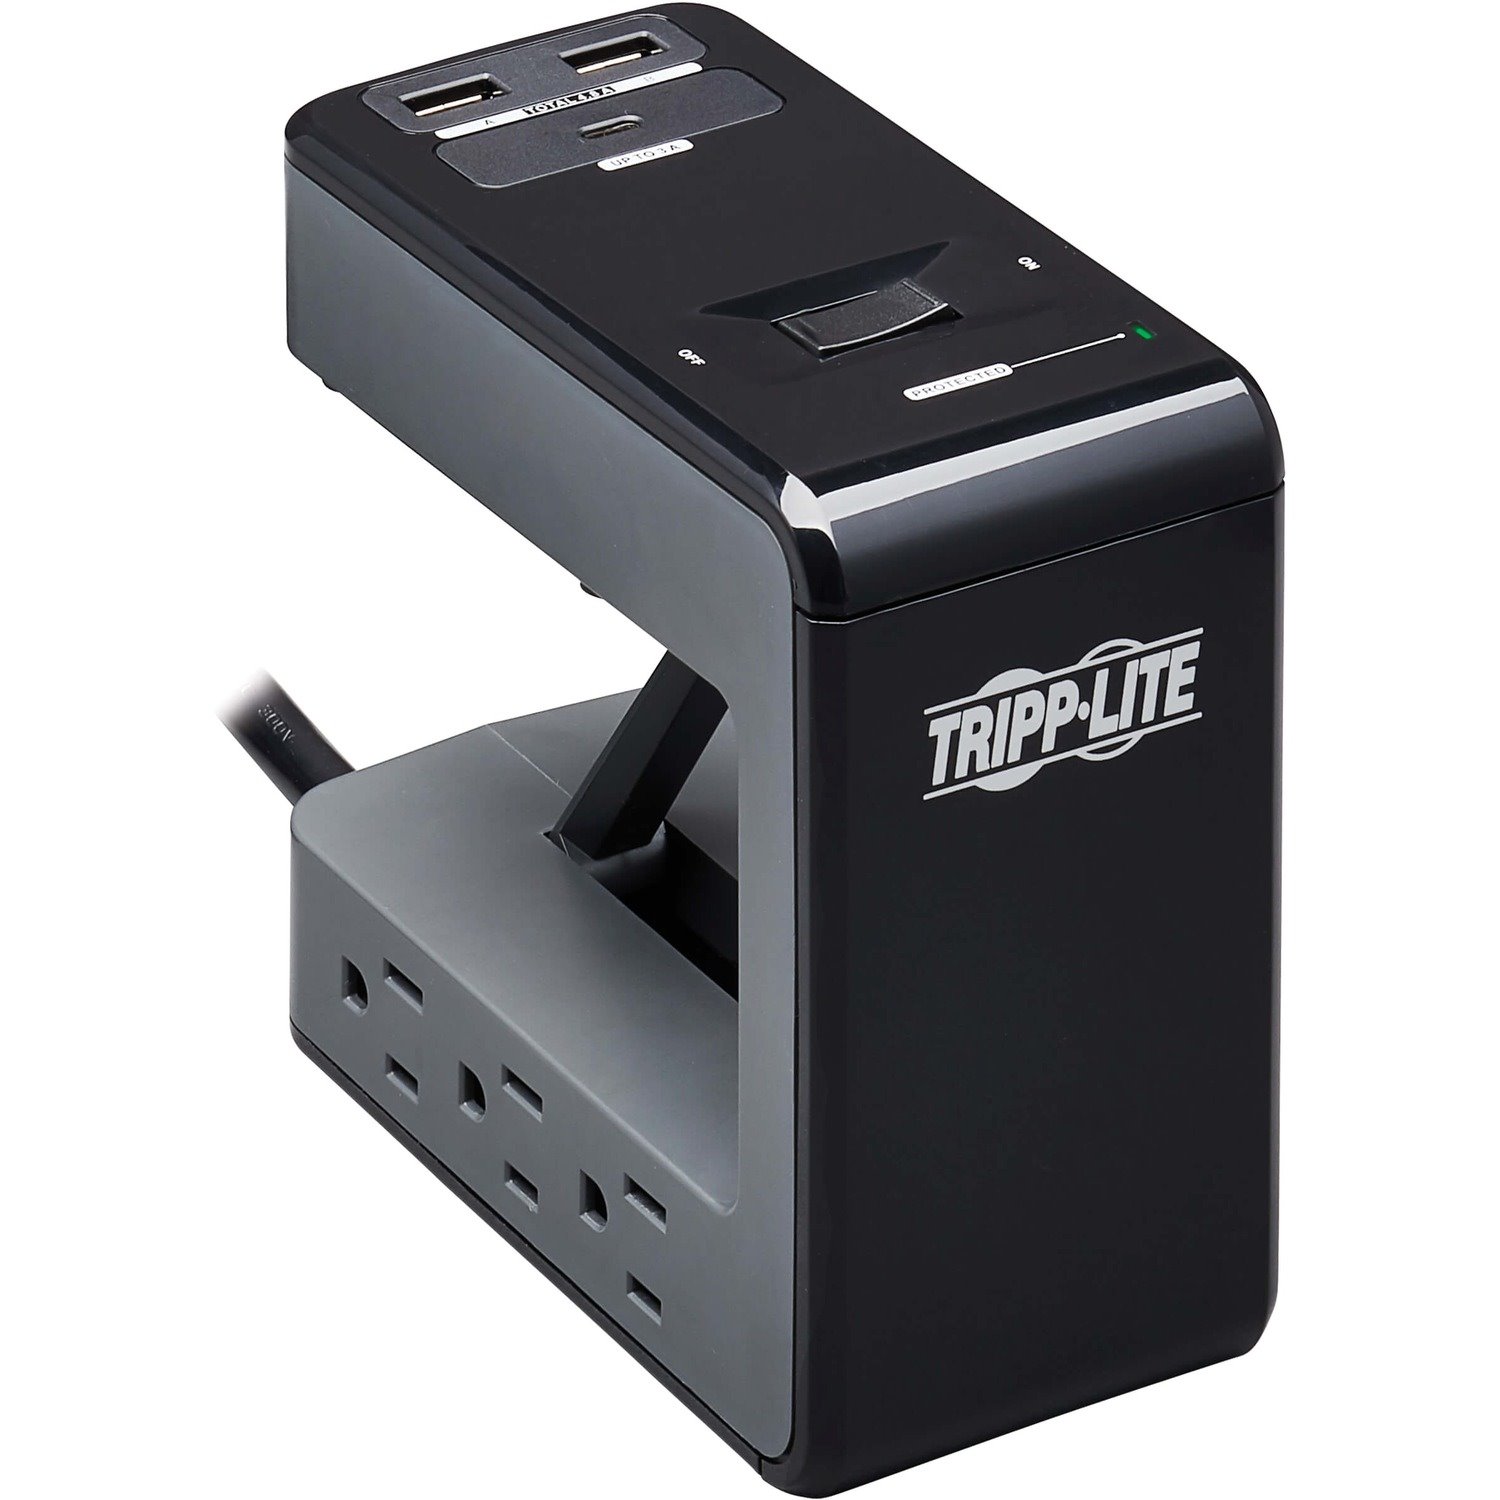 Tripp Lite Safe-IT Clamp Surge Protector 6Outlet 5-15R 3 USB Ports 8ft Cord